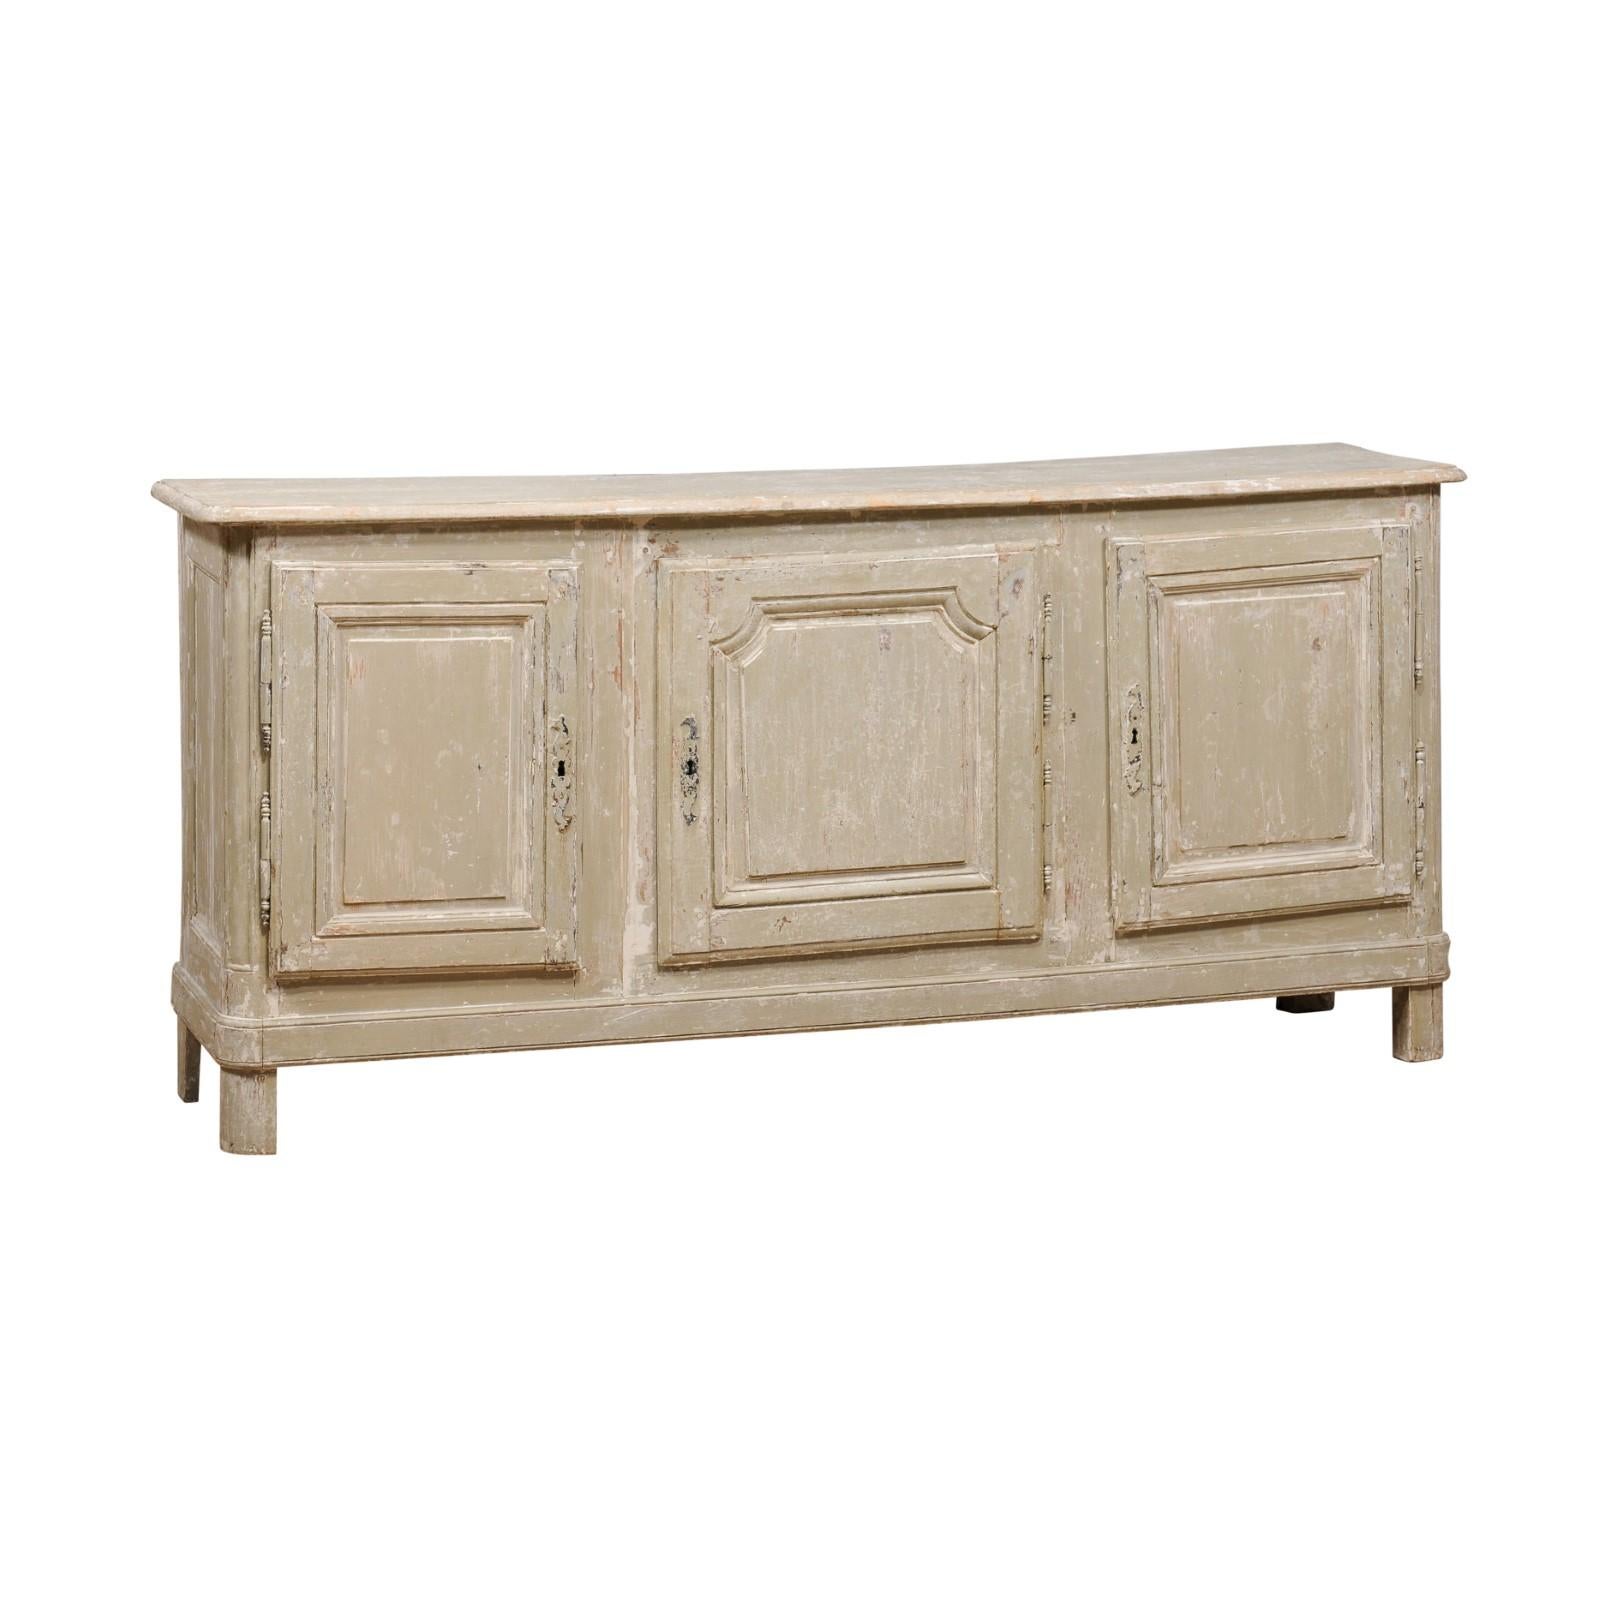 A French grey/beige painted enfilade from the 19th century with three doors and rustic character. Embark on a journey through time with this 19th-century French enfilade, a symphony of rustic character and understated elegance. Coated in an